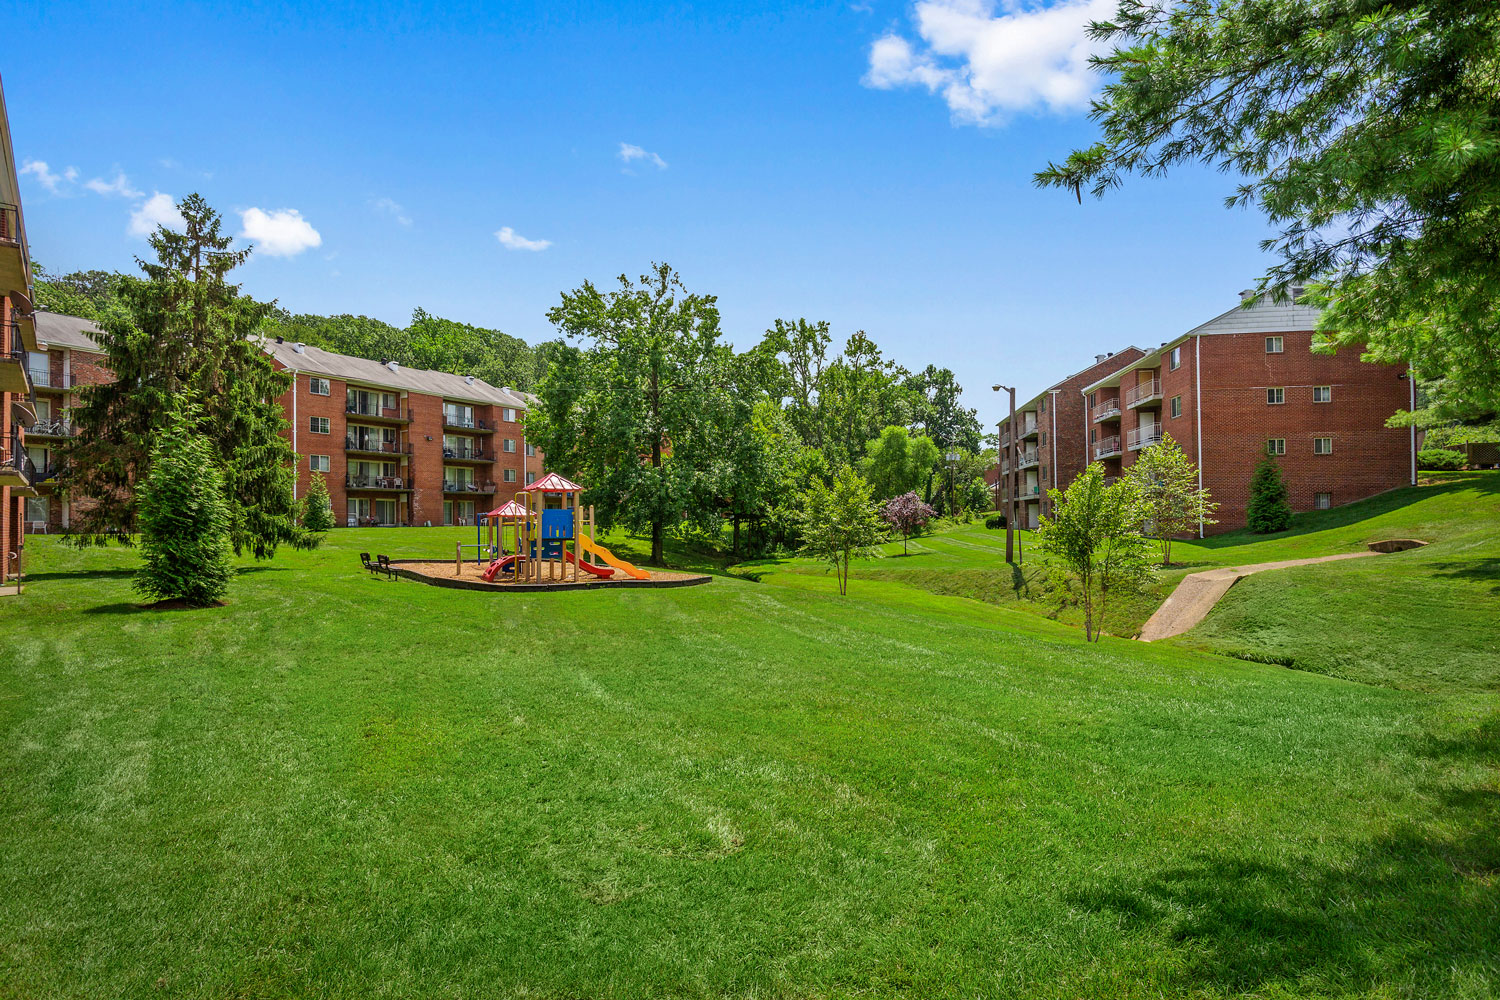 Beautiful landscaping at Whitehall Square Apartments in Suitland, MD